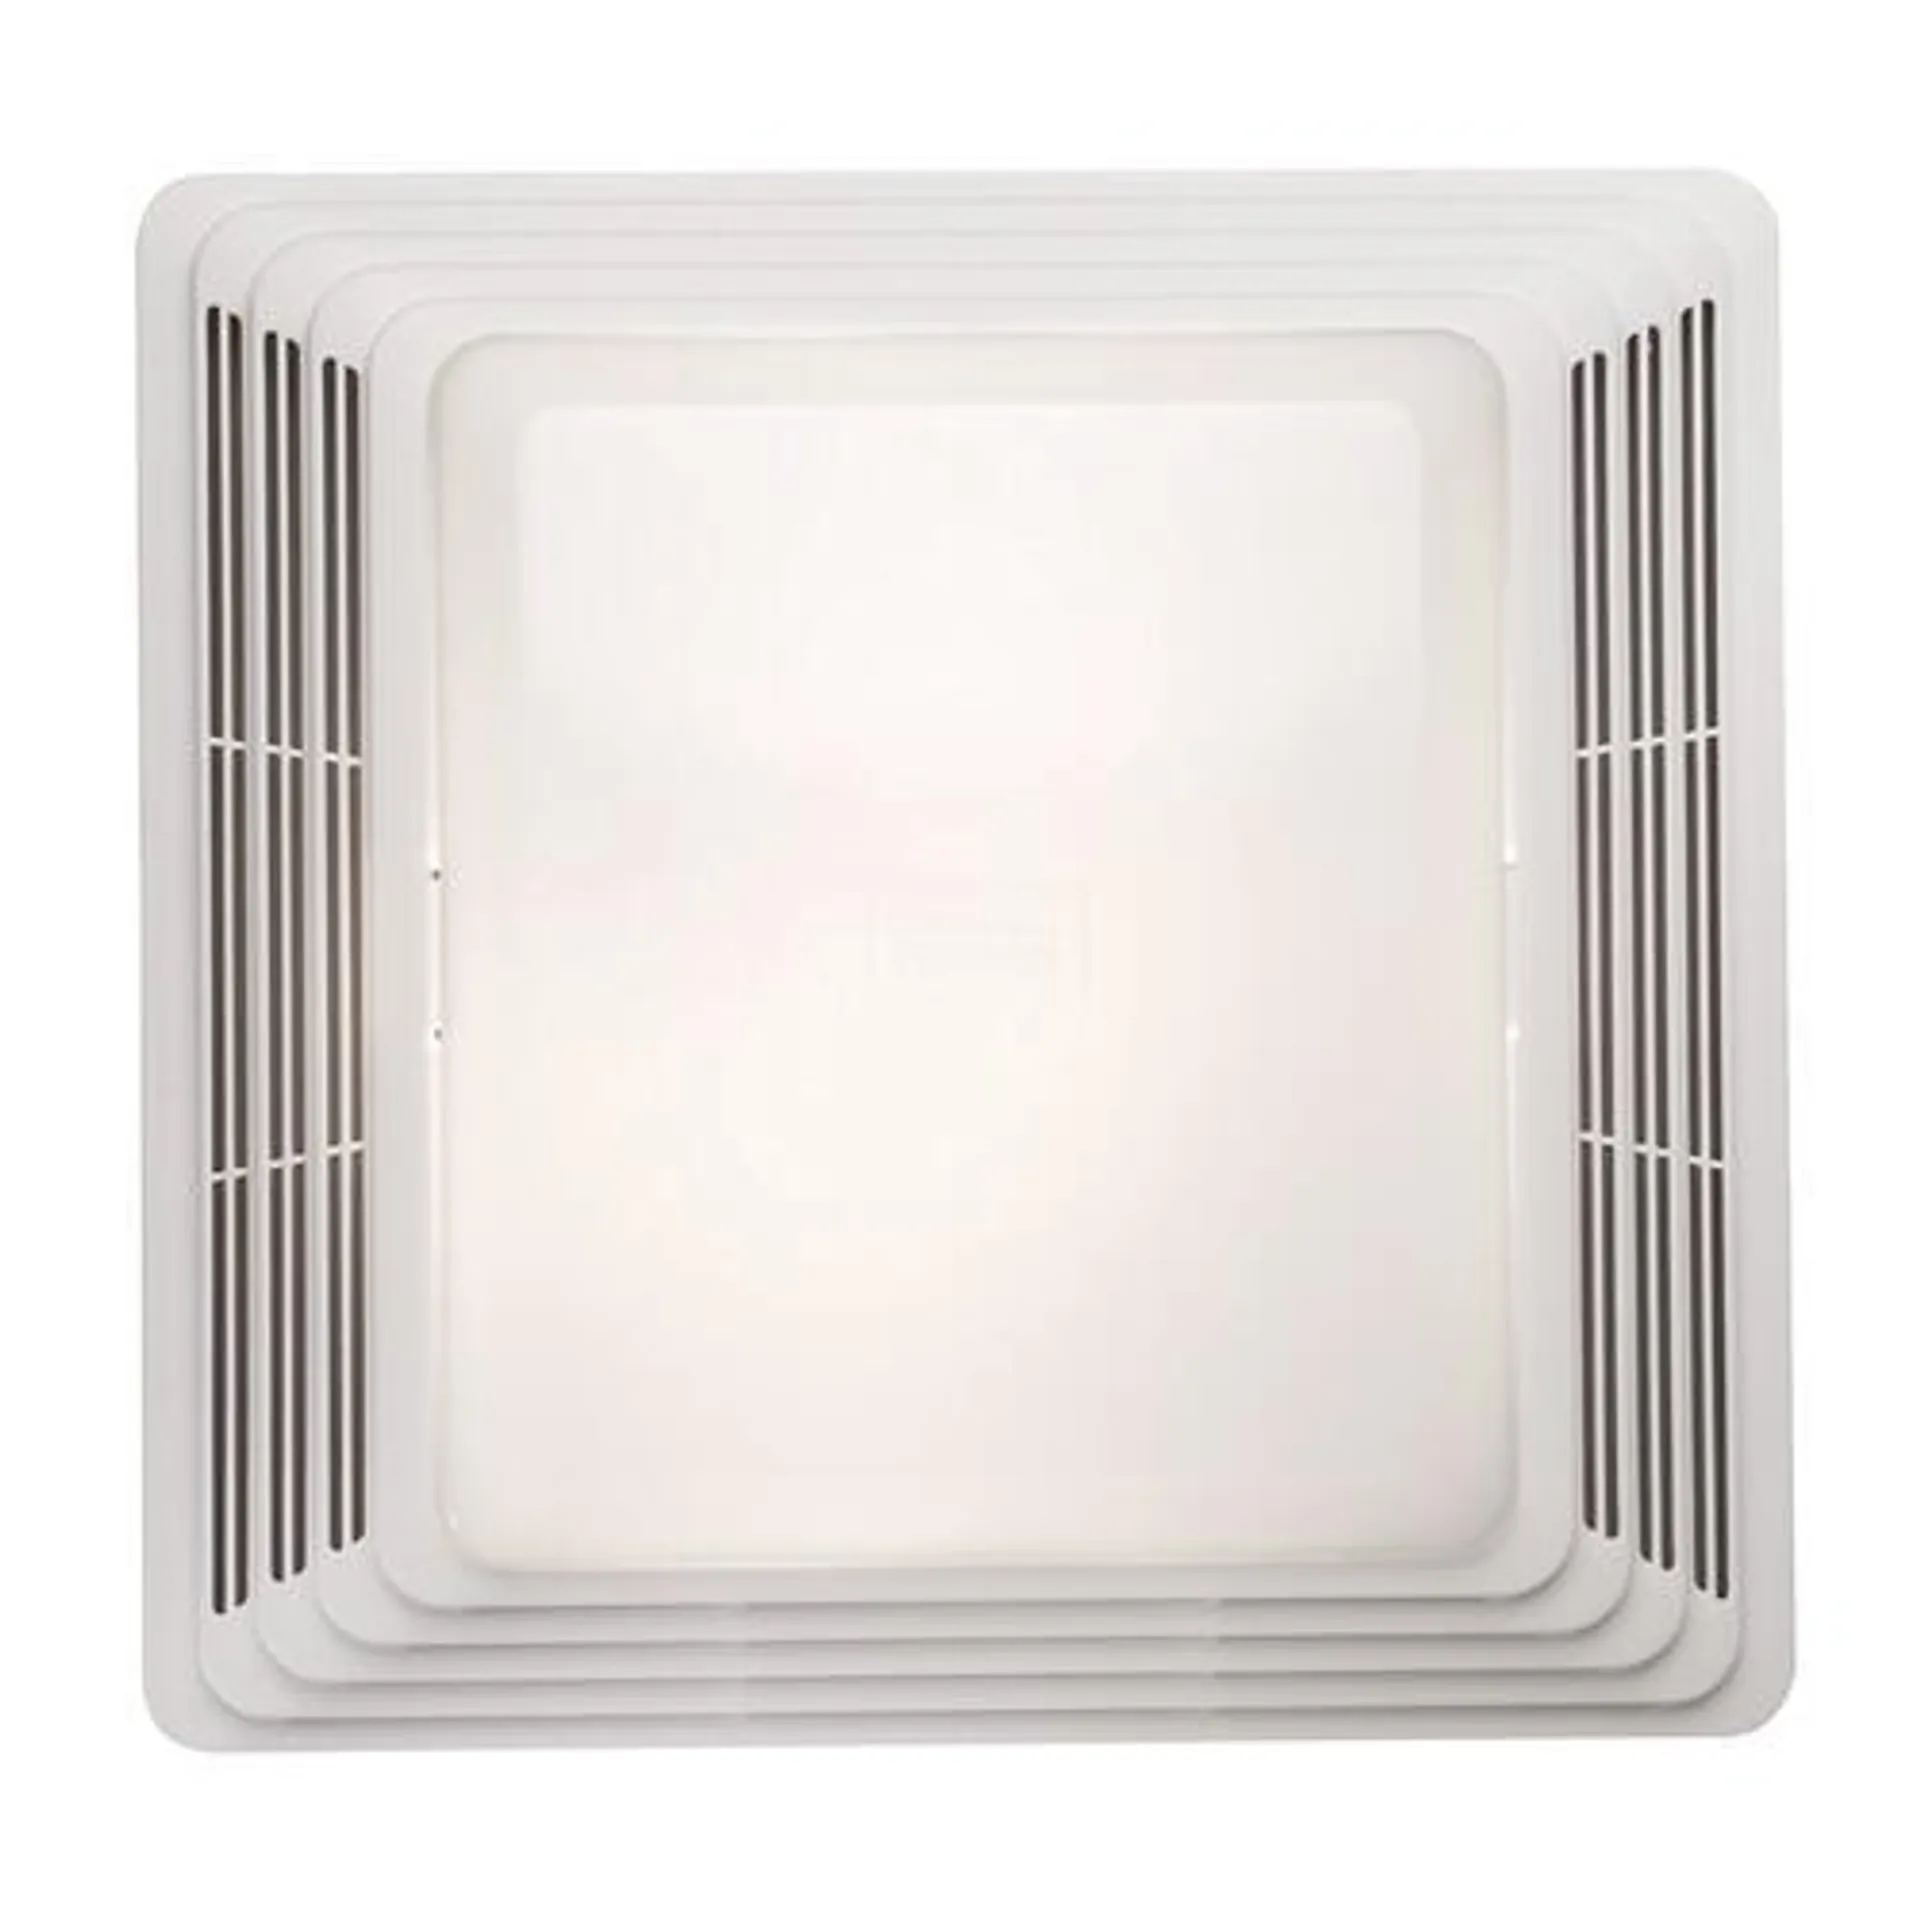 Broan® Bath Exhaust Fan Replacement Grille Cover